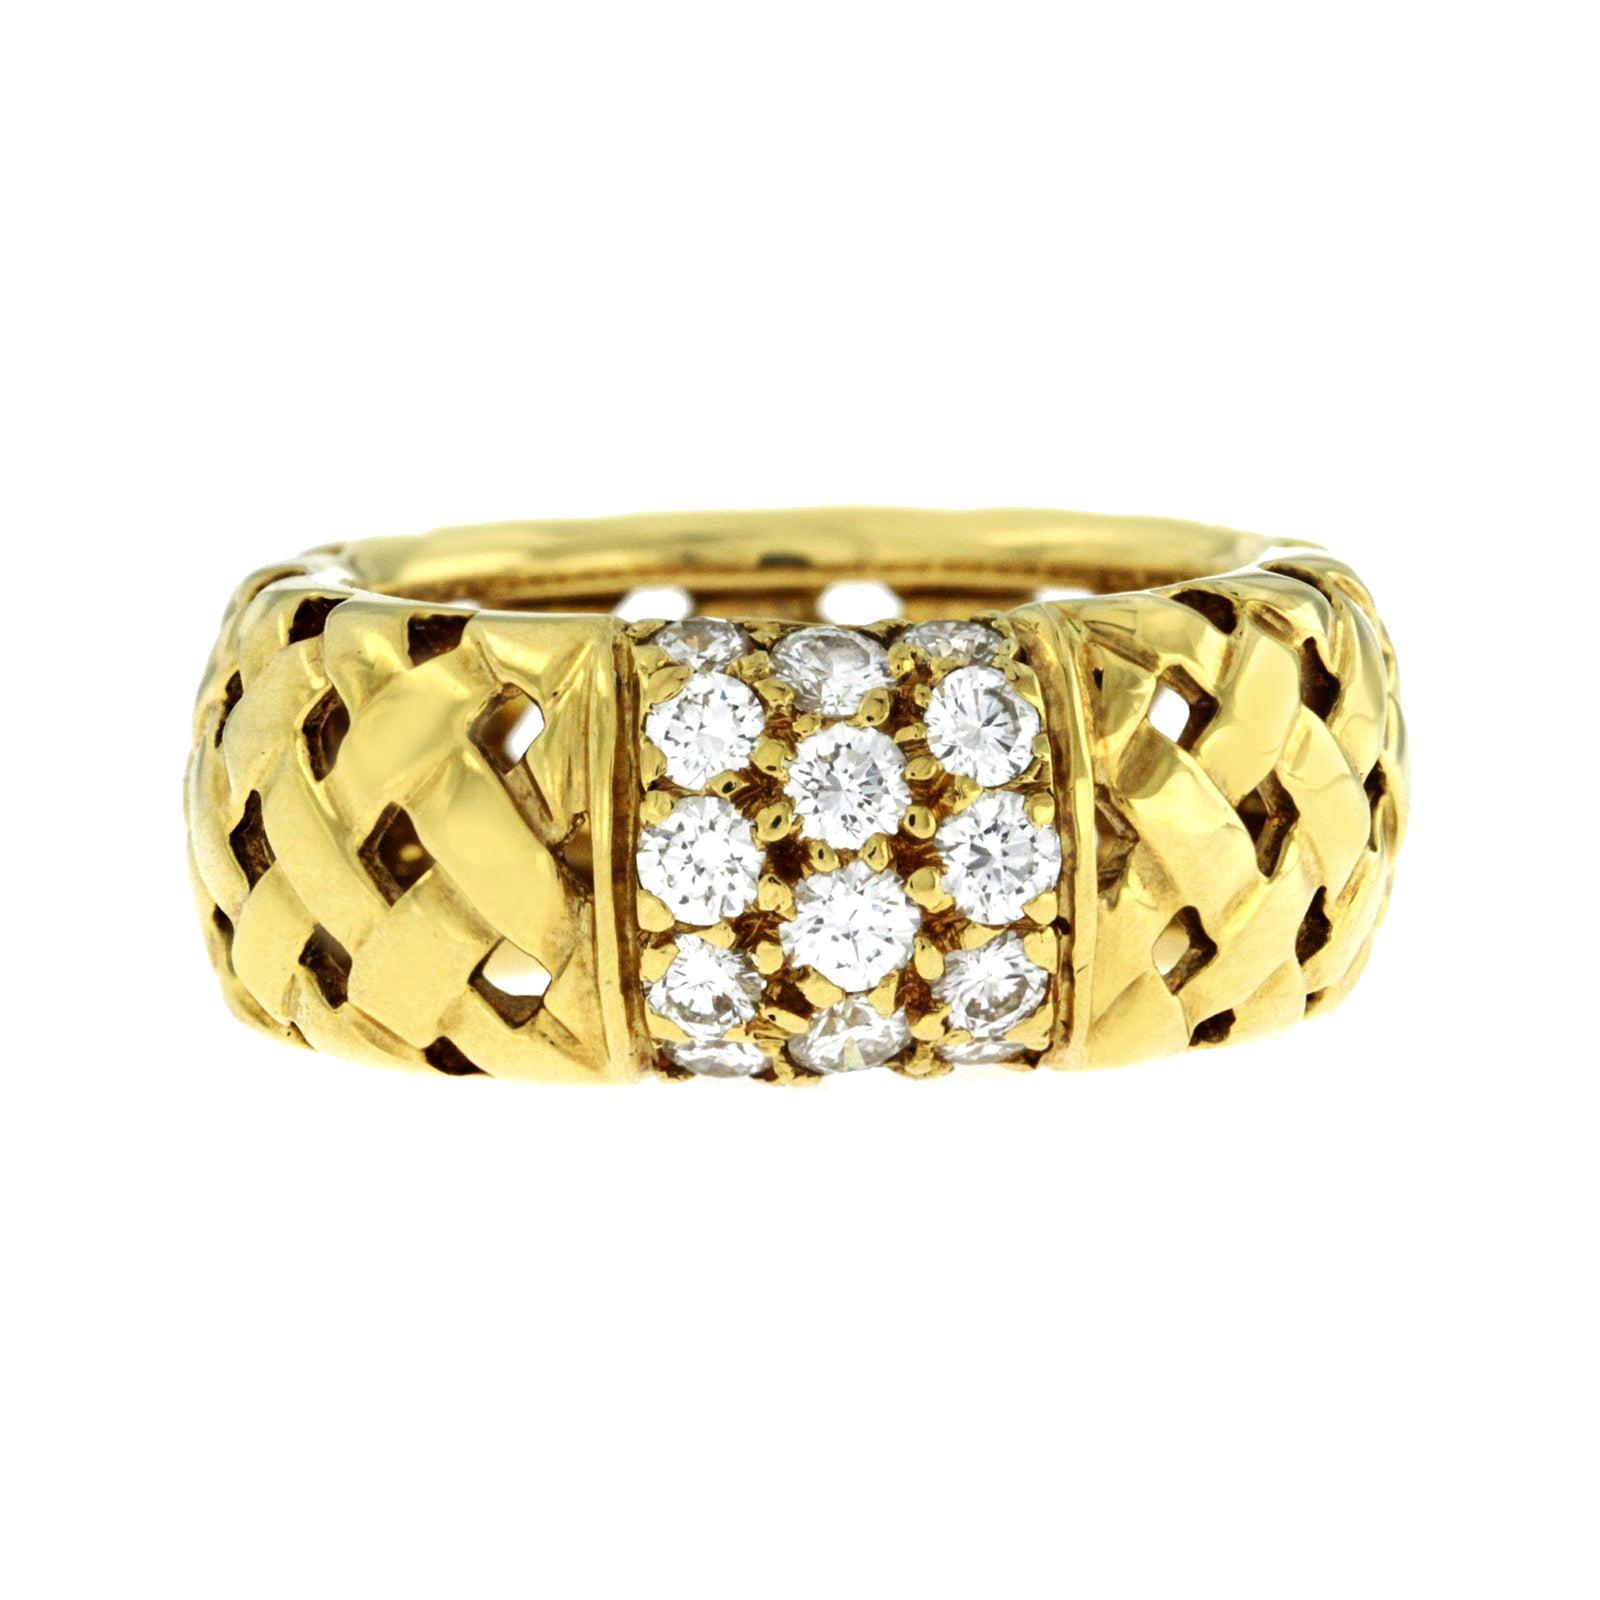 Auth Tiffany & Co. 18 Karat Yellow Gold 0.70 Carat Diamonds Braided Band Ring For Sale